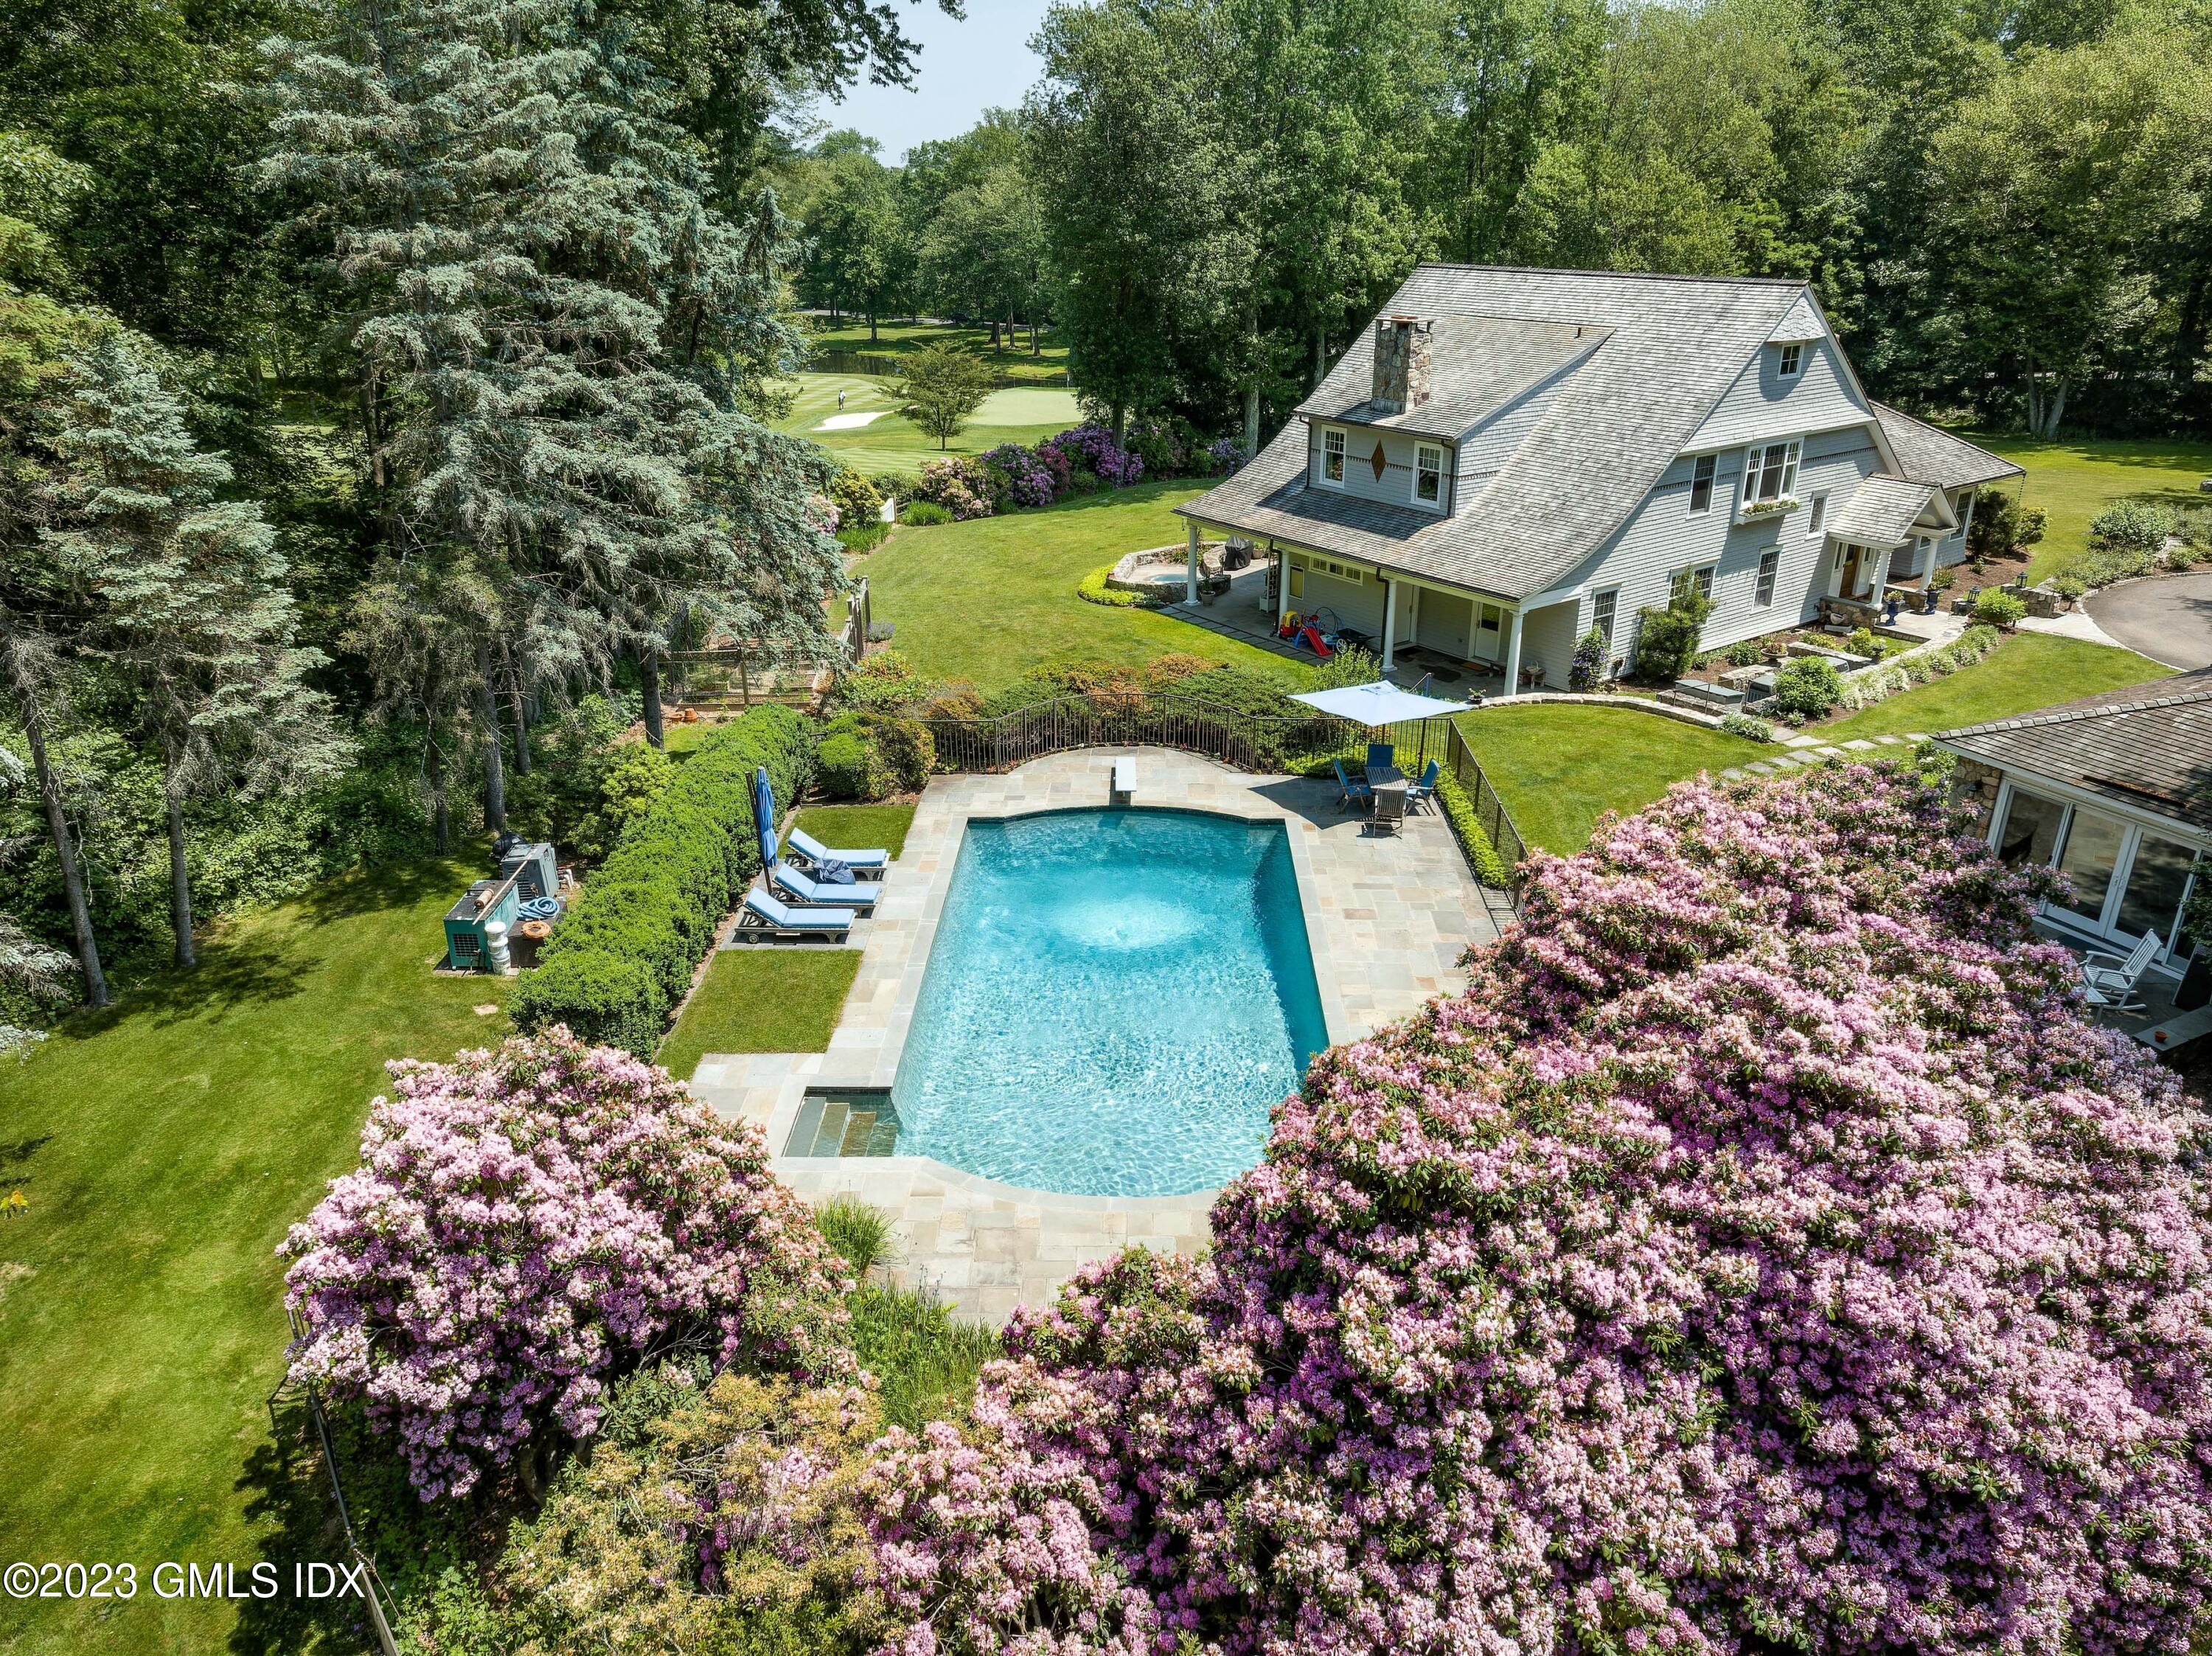 900 North Street, Greenwich, Connecticut - 5 Bedrooms  
7.5 Bathrooms - 